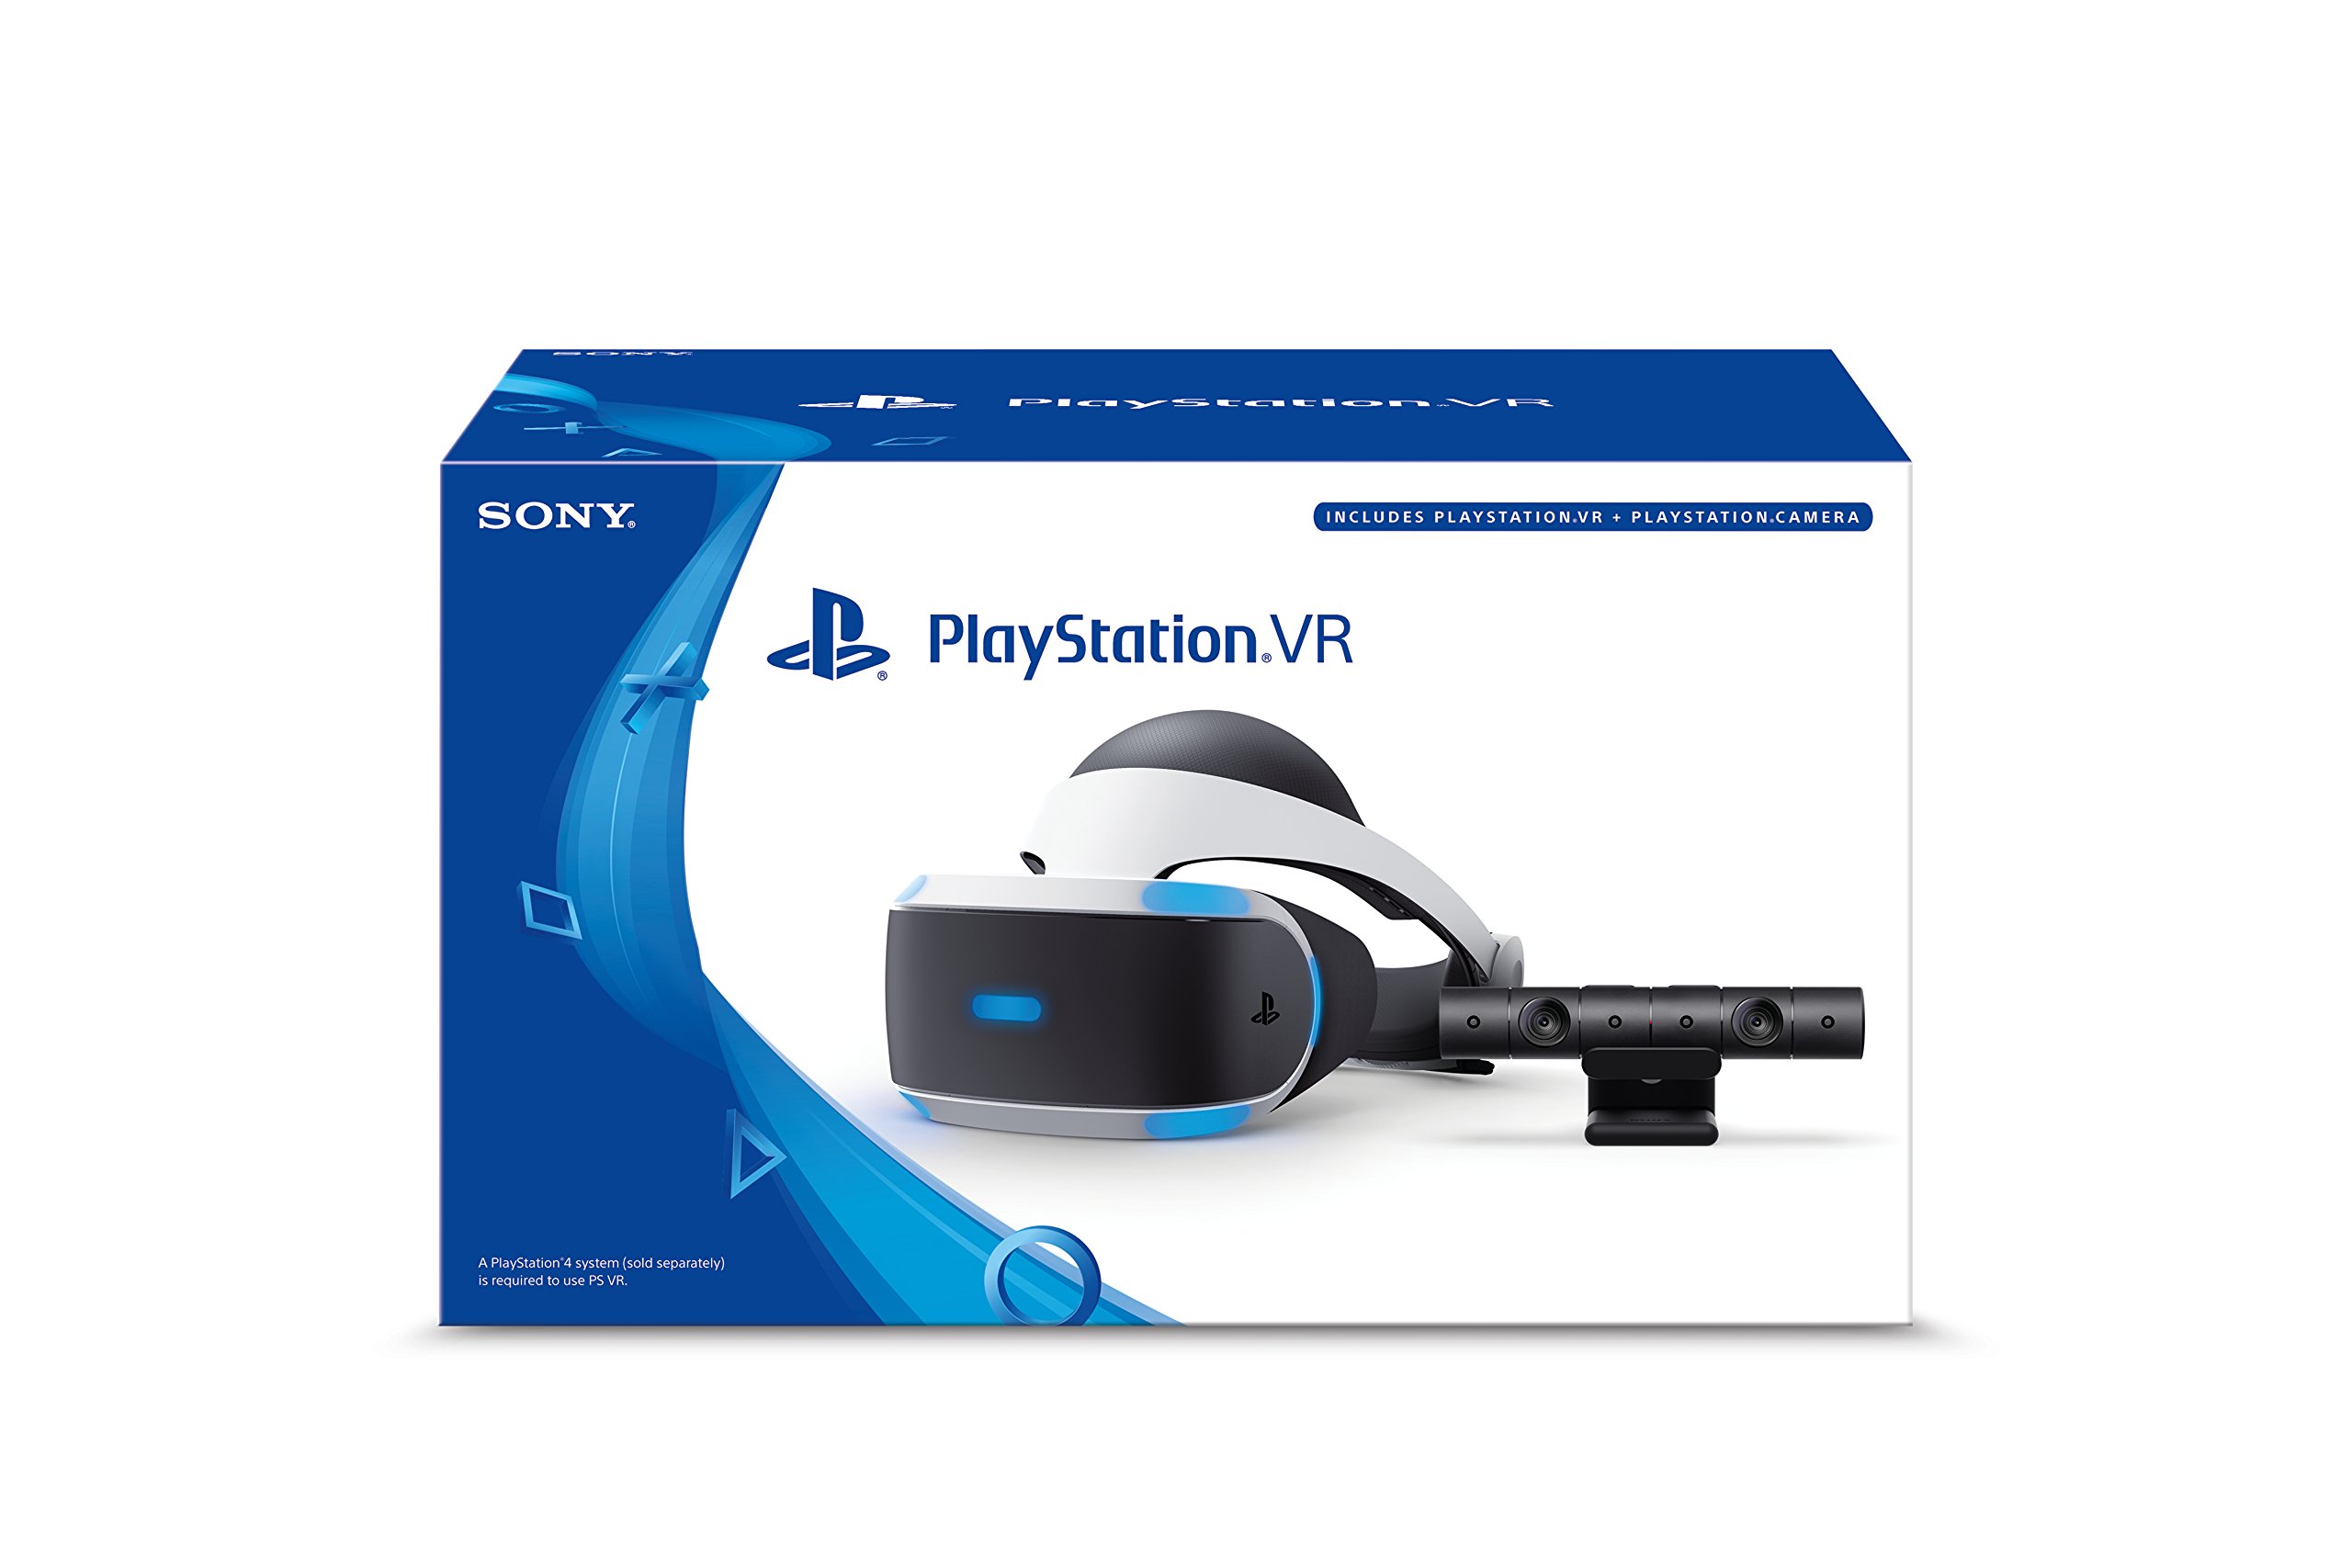 PS4: PLAYSTATION PSVR - MODEL 2 - HEADSET AND ALL TO MAKE IT WORK IN THE BOX(USED)